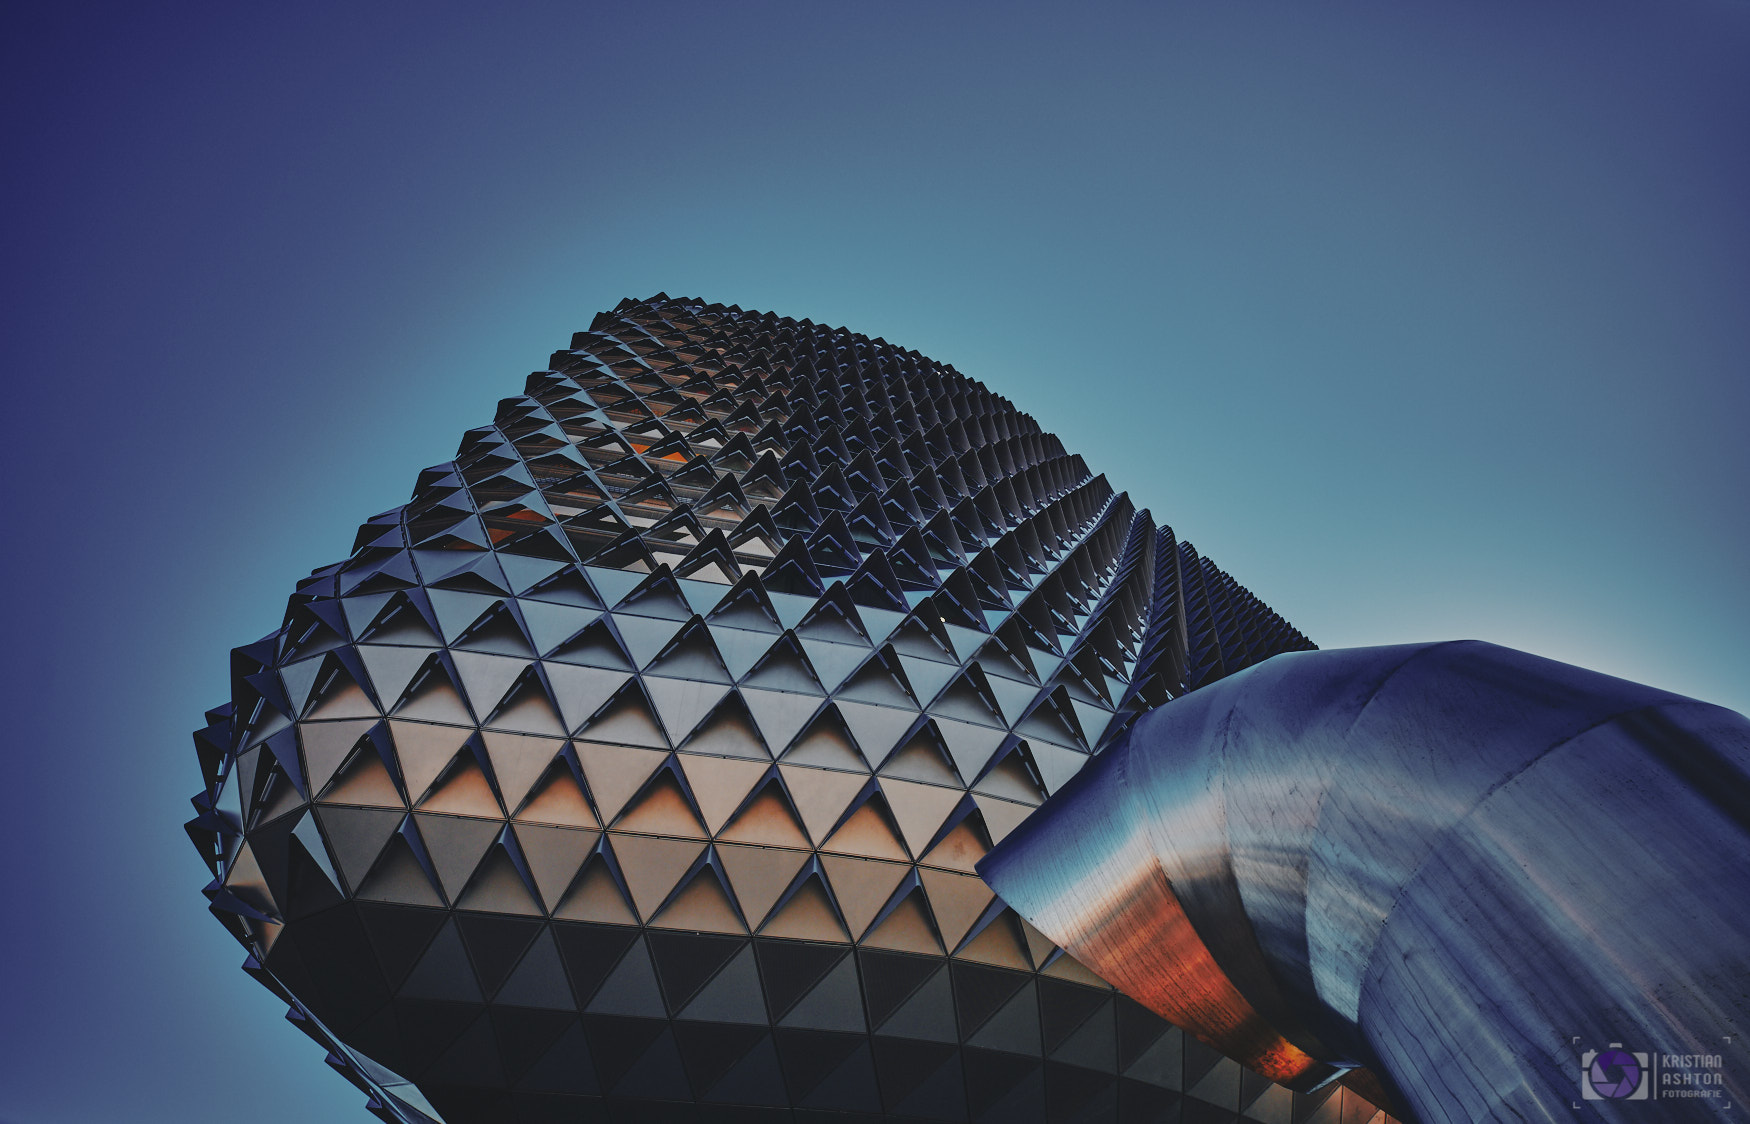 The SAHMRI (South Australian Health and Medical Research Institute) building